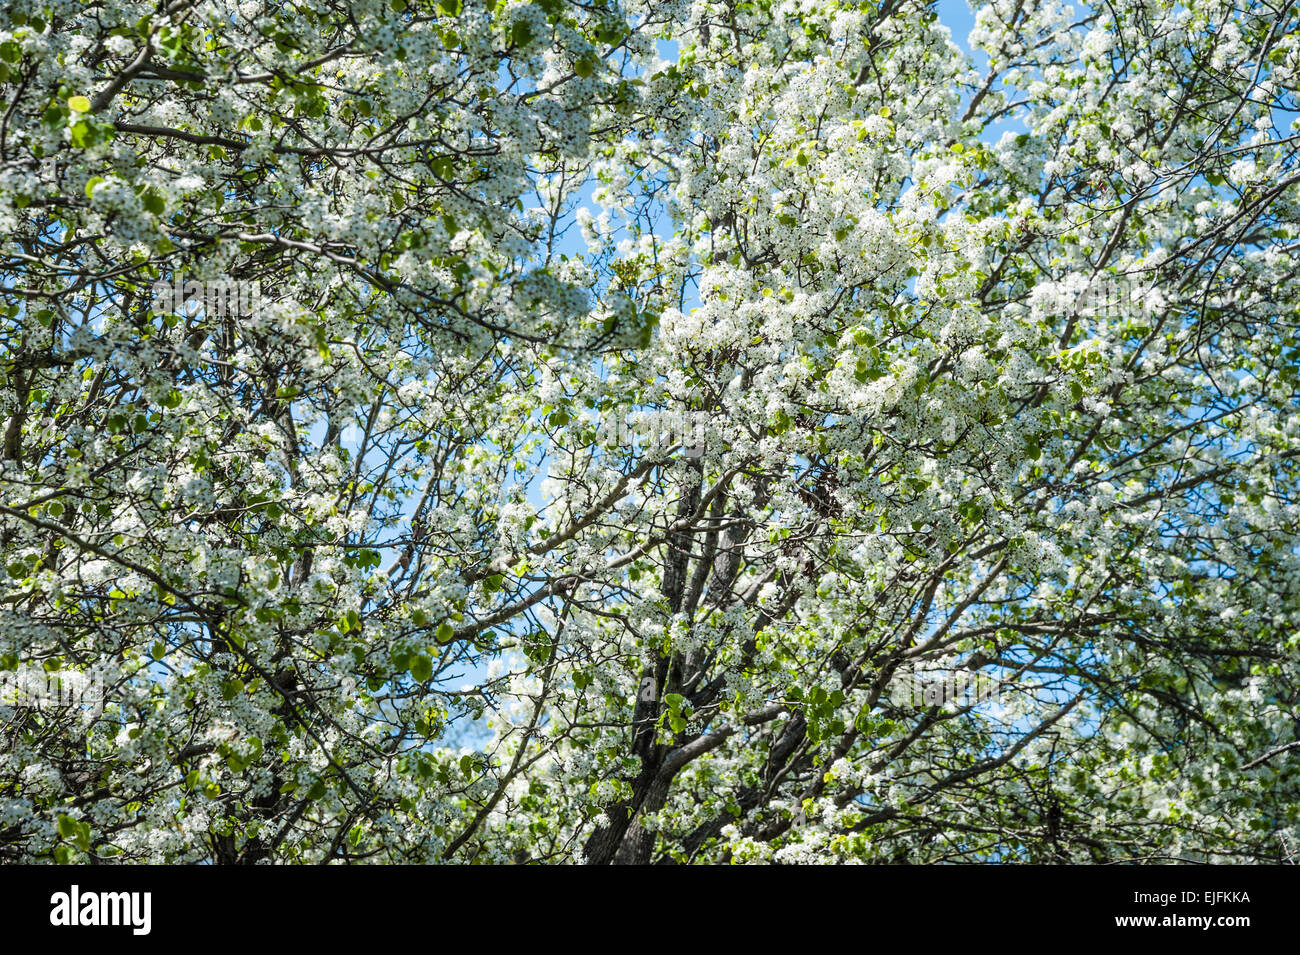 White Spring blossoms and new green leaves on Bradford pear trees in Georgia, USA. Stock Photo